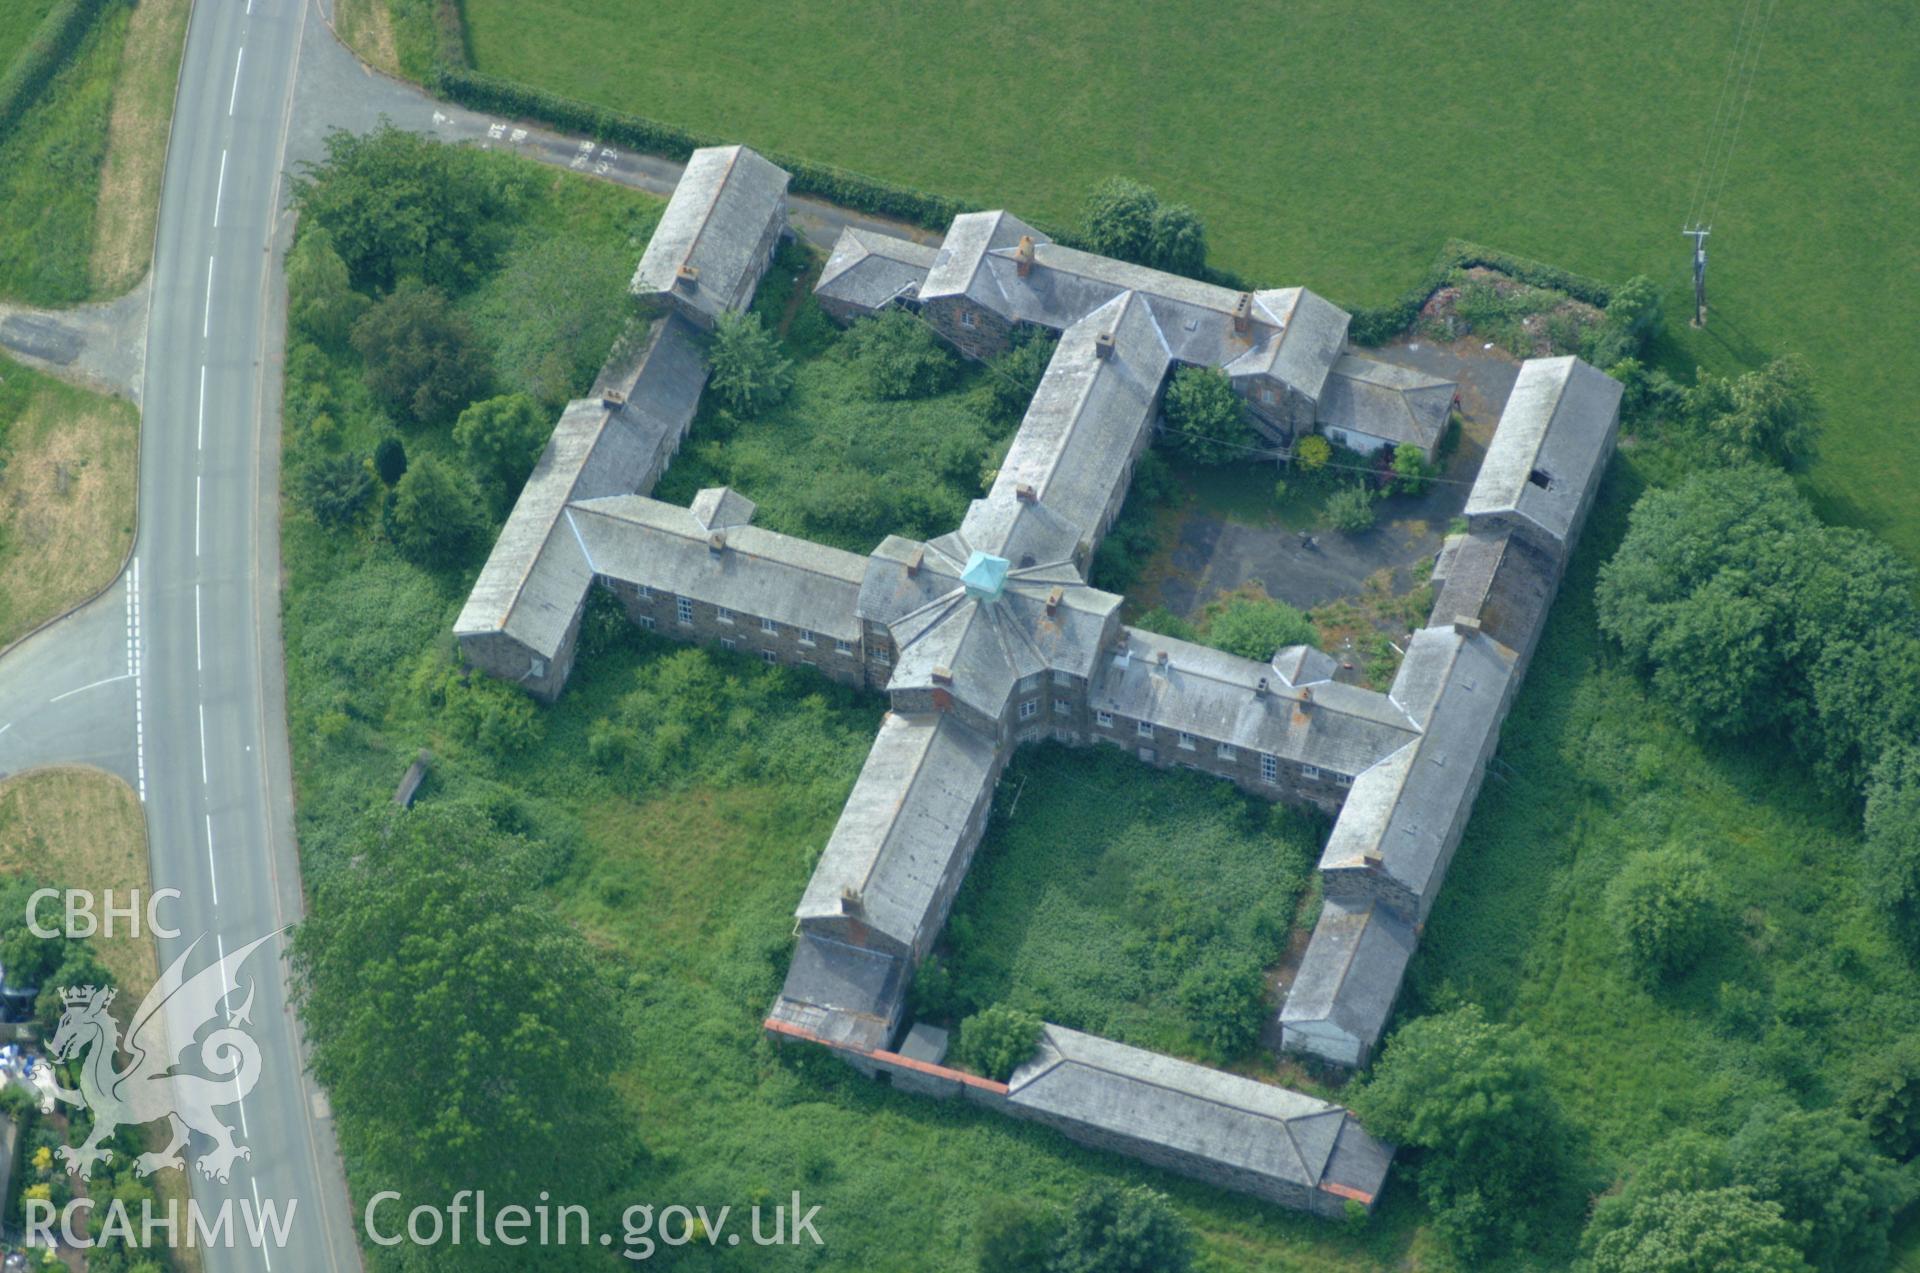 RCAHMW colour oblique aerial photograph of Llanfyllin Union Workhouse, Llanfyllin taken on 08/06/2004 by Toby Driver